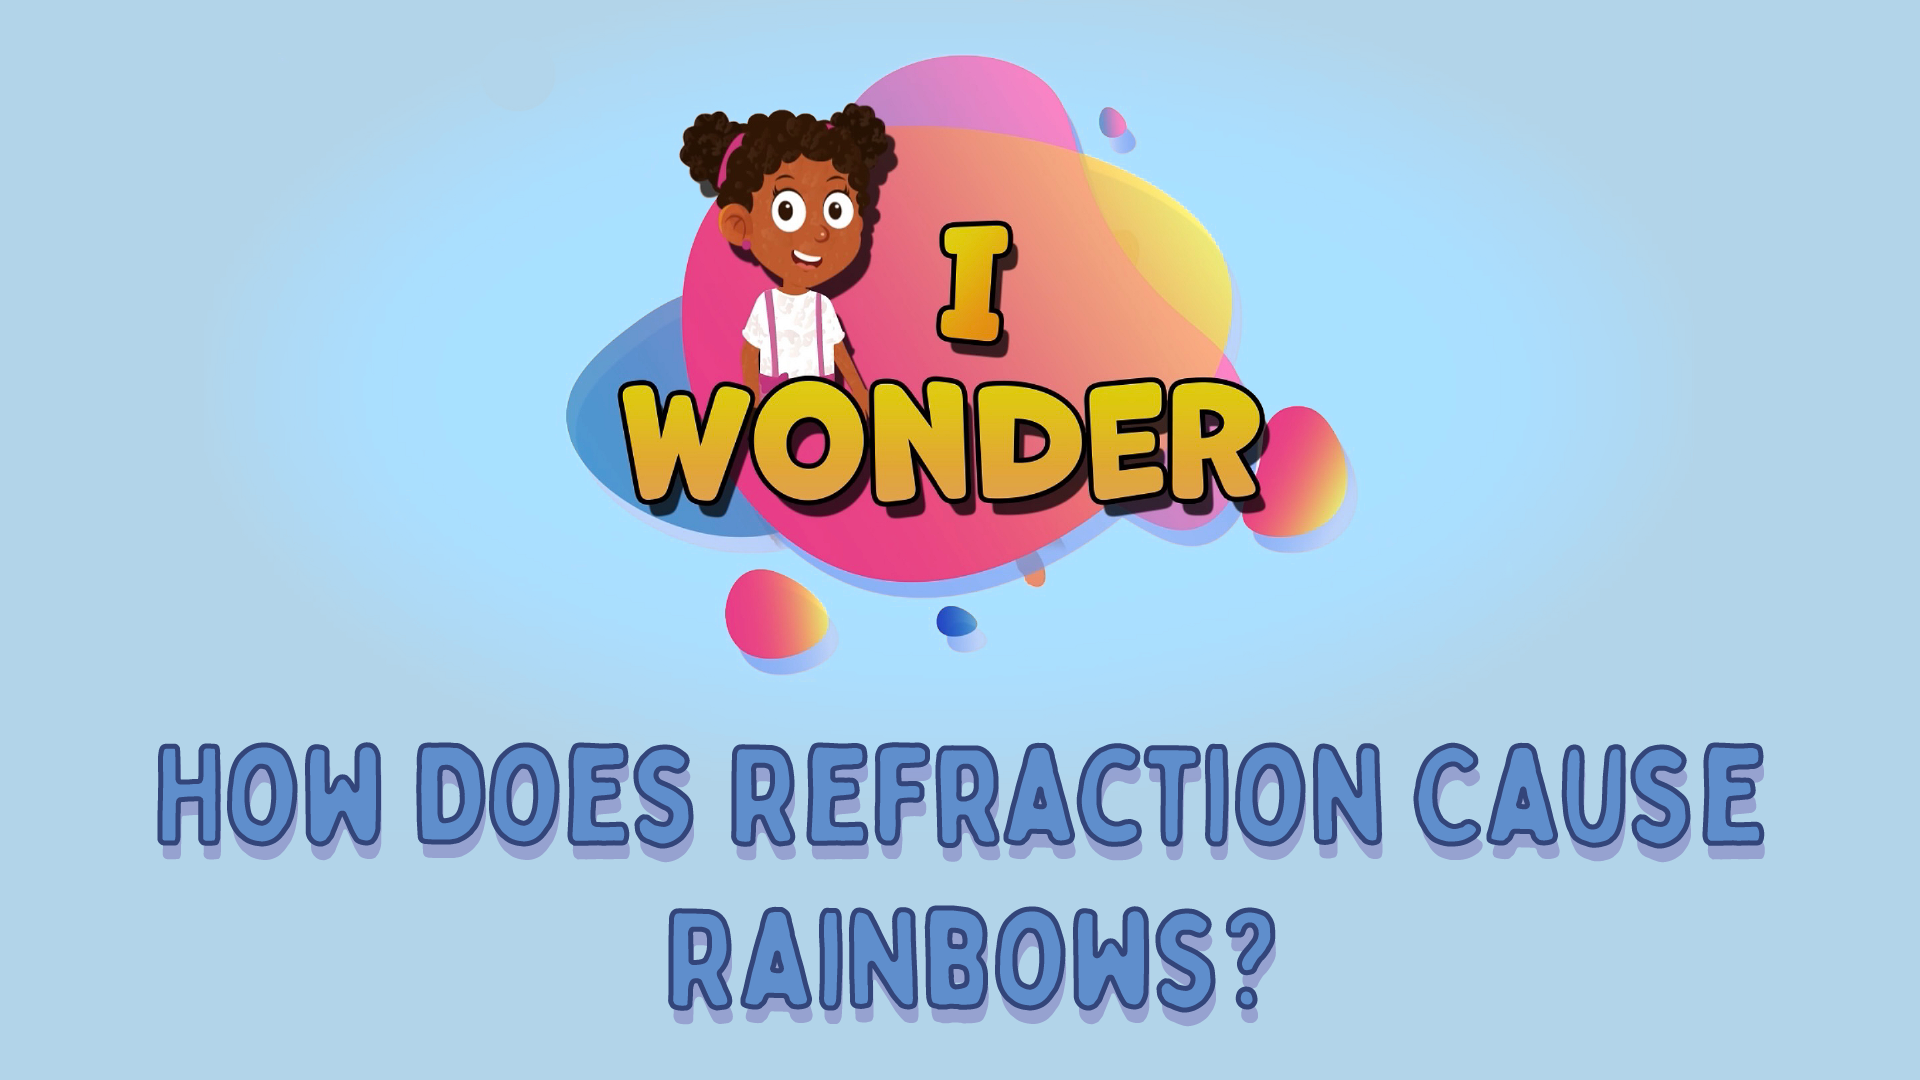 How Does Refraction Cause Rainbows?